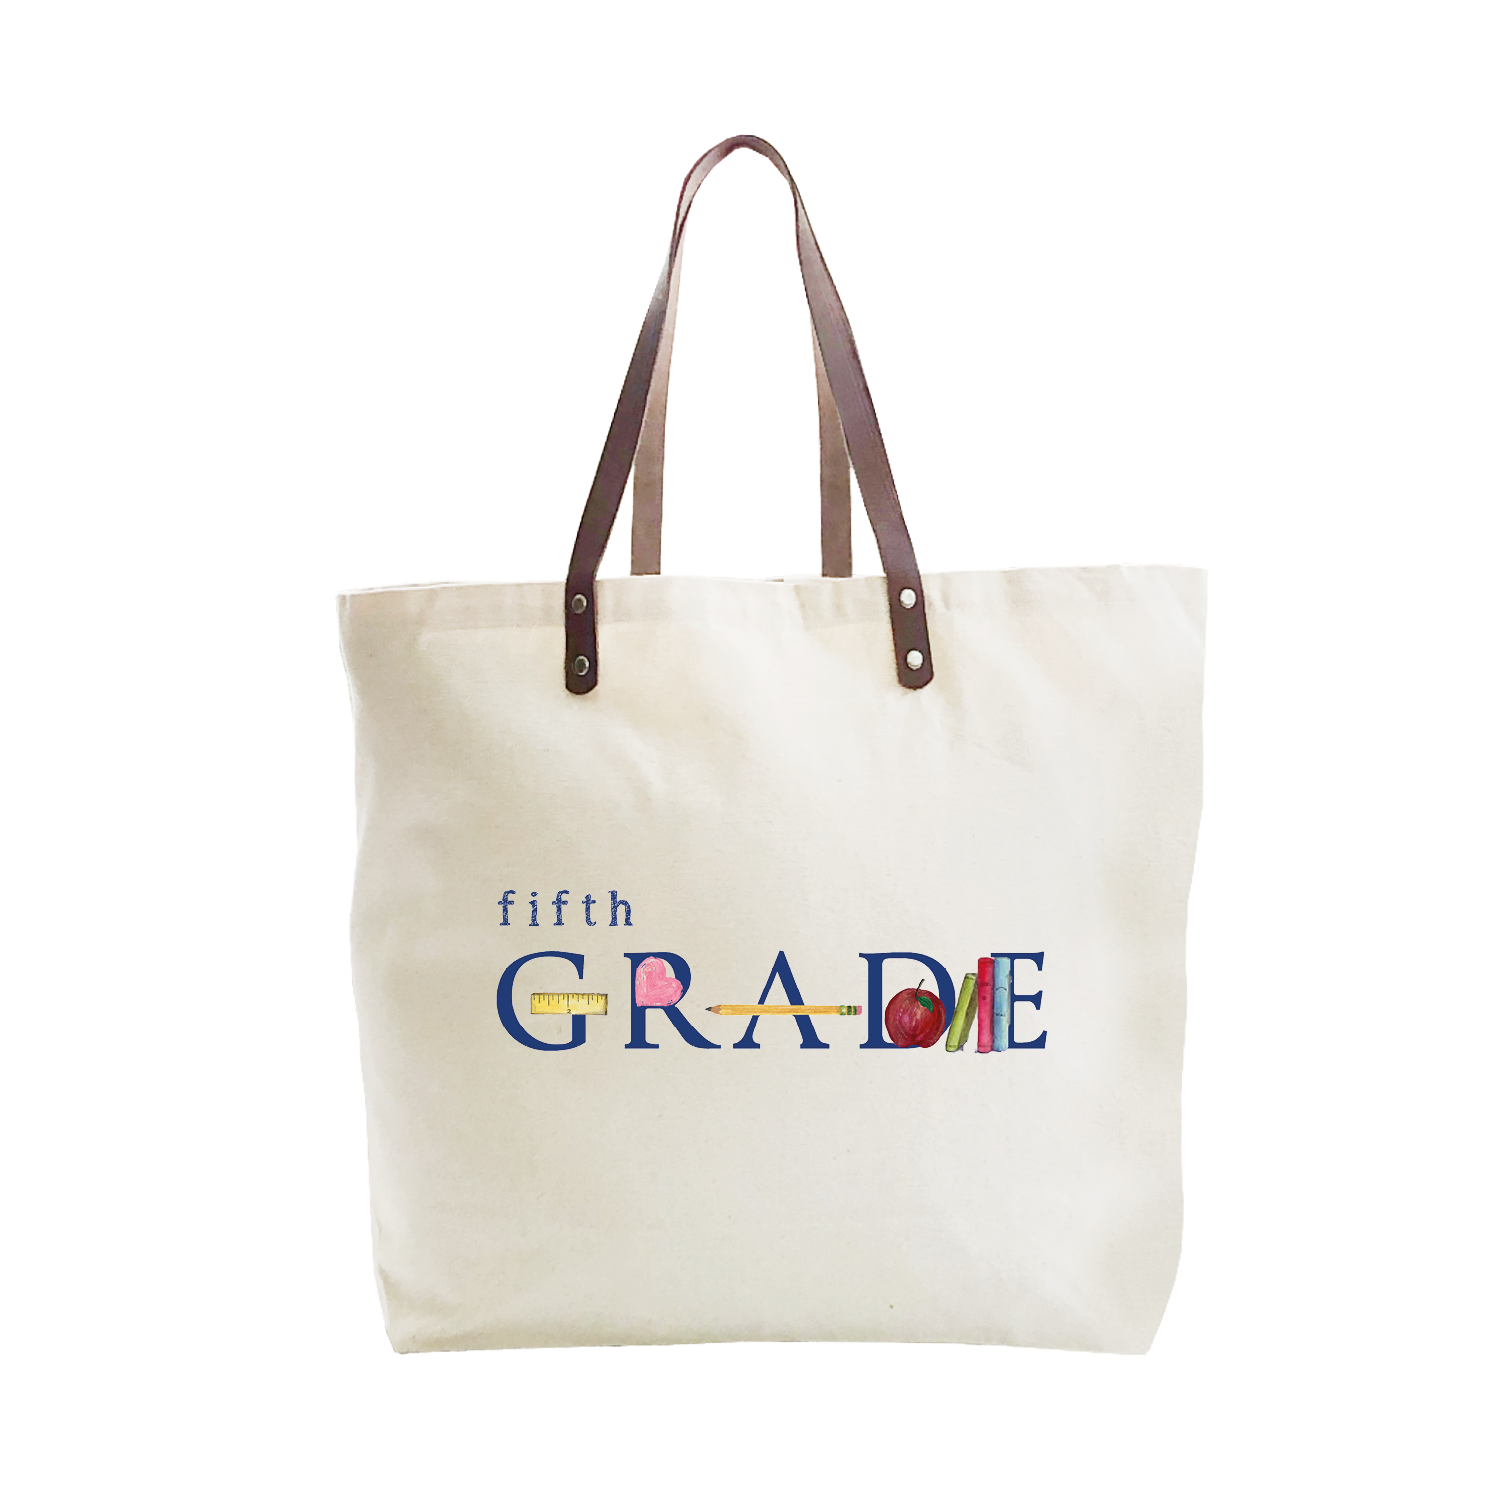 fifth grade large tote